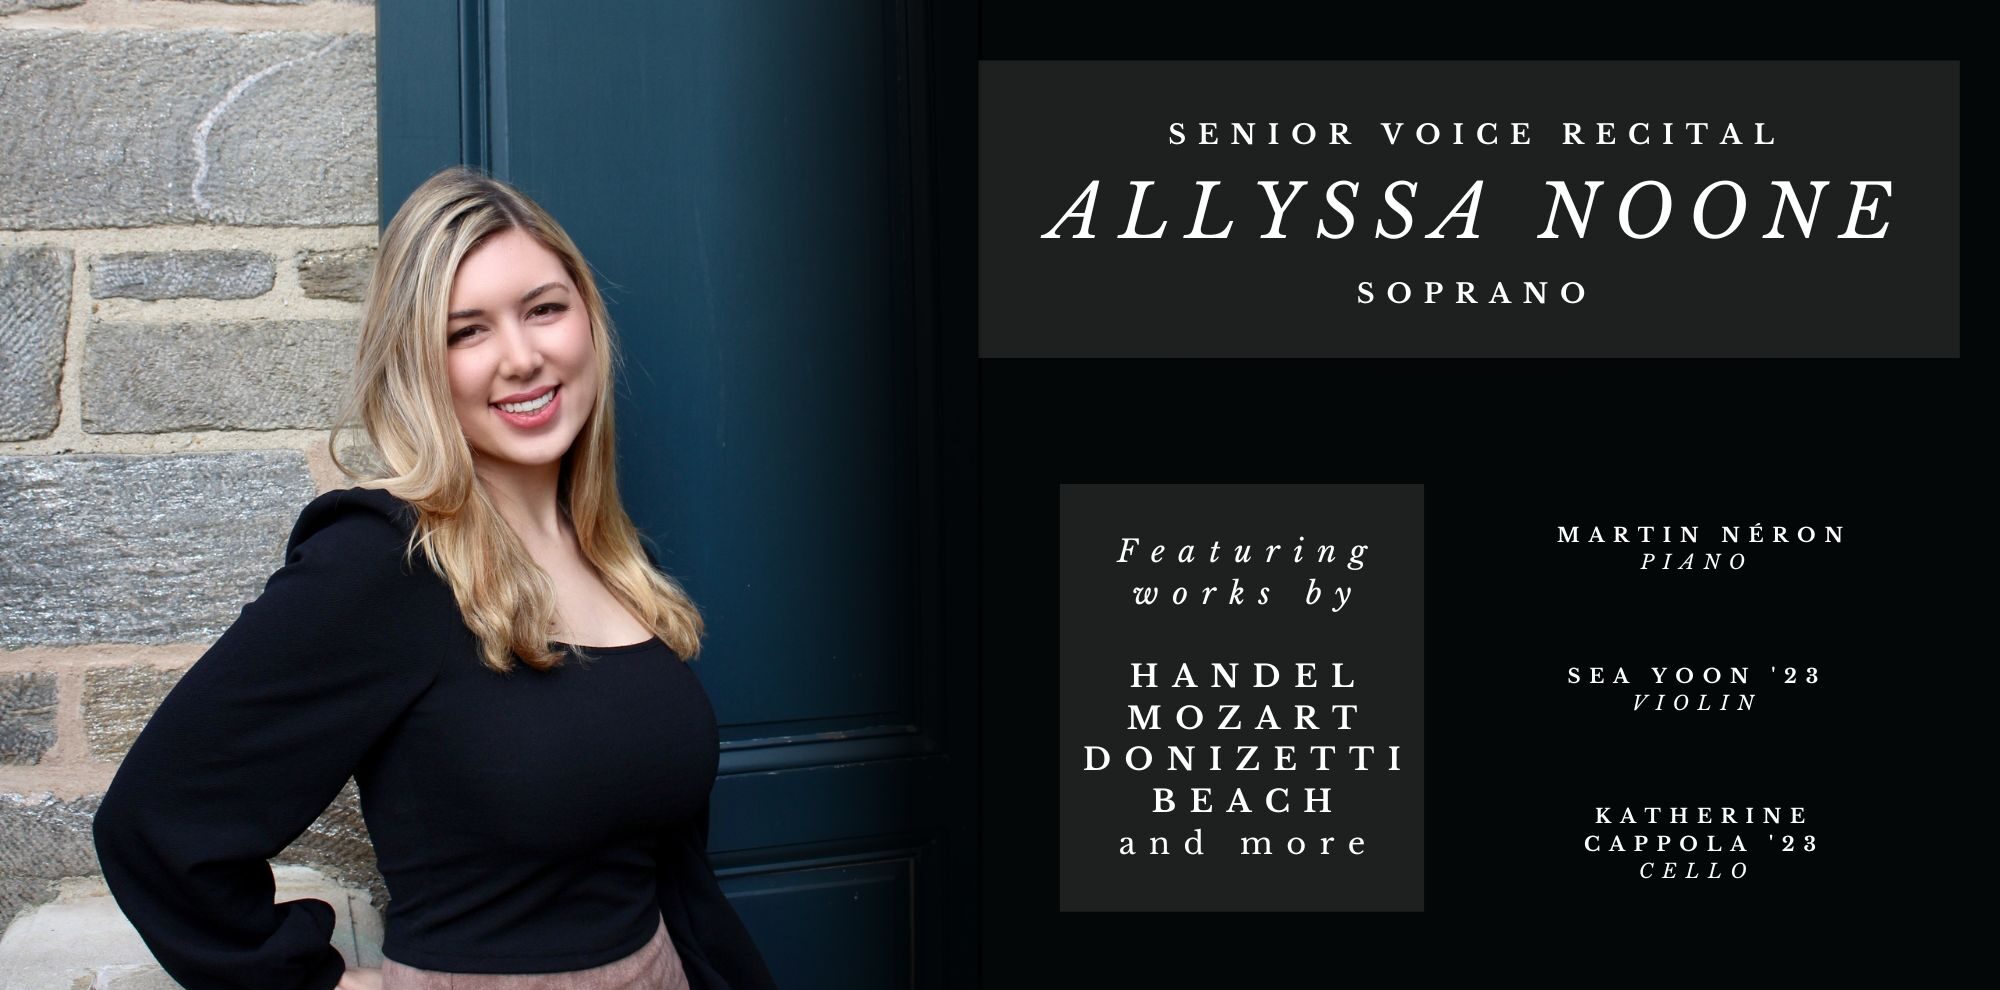 poster with smiling headshot of Allyssa Noone, with text about her senior voice recital